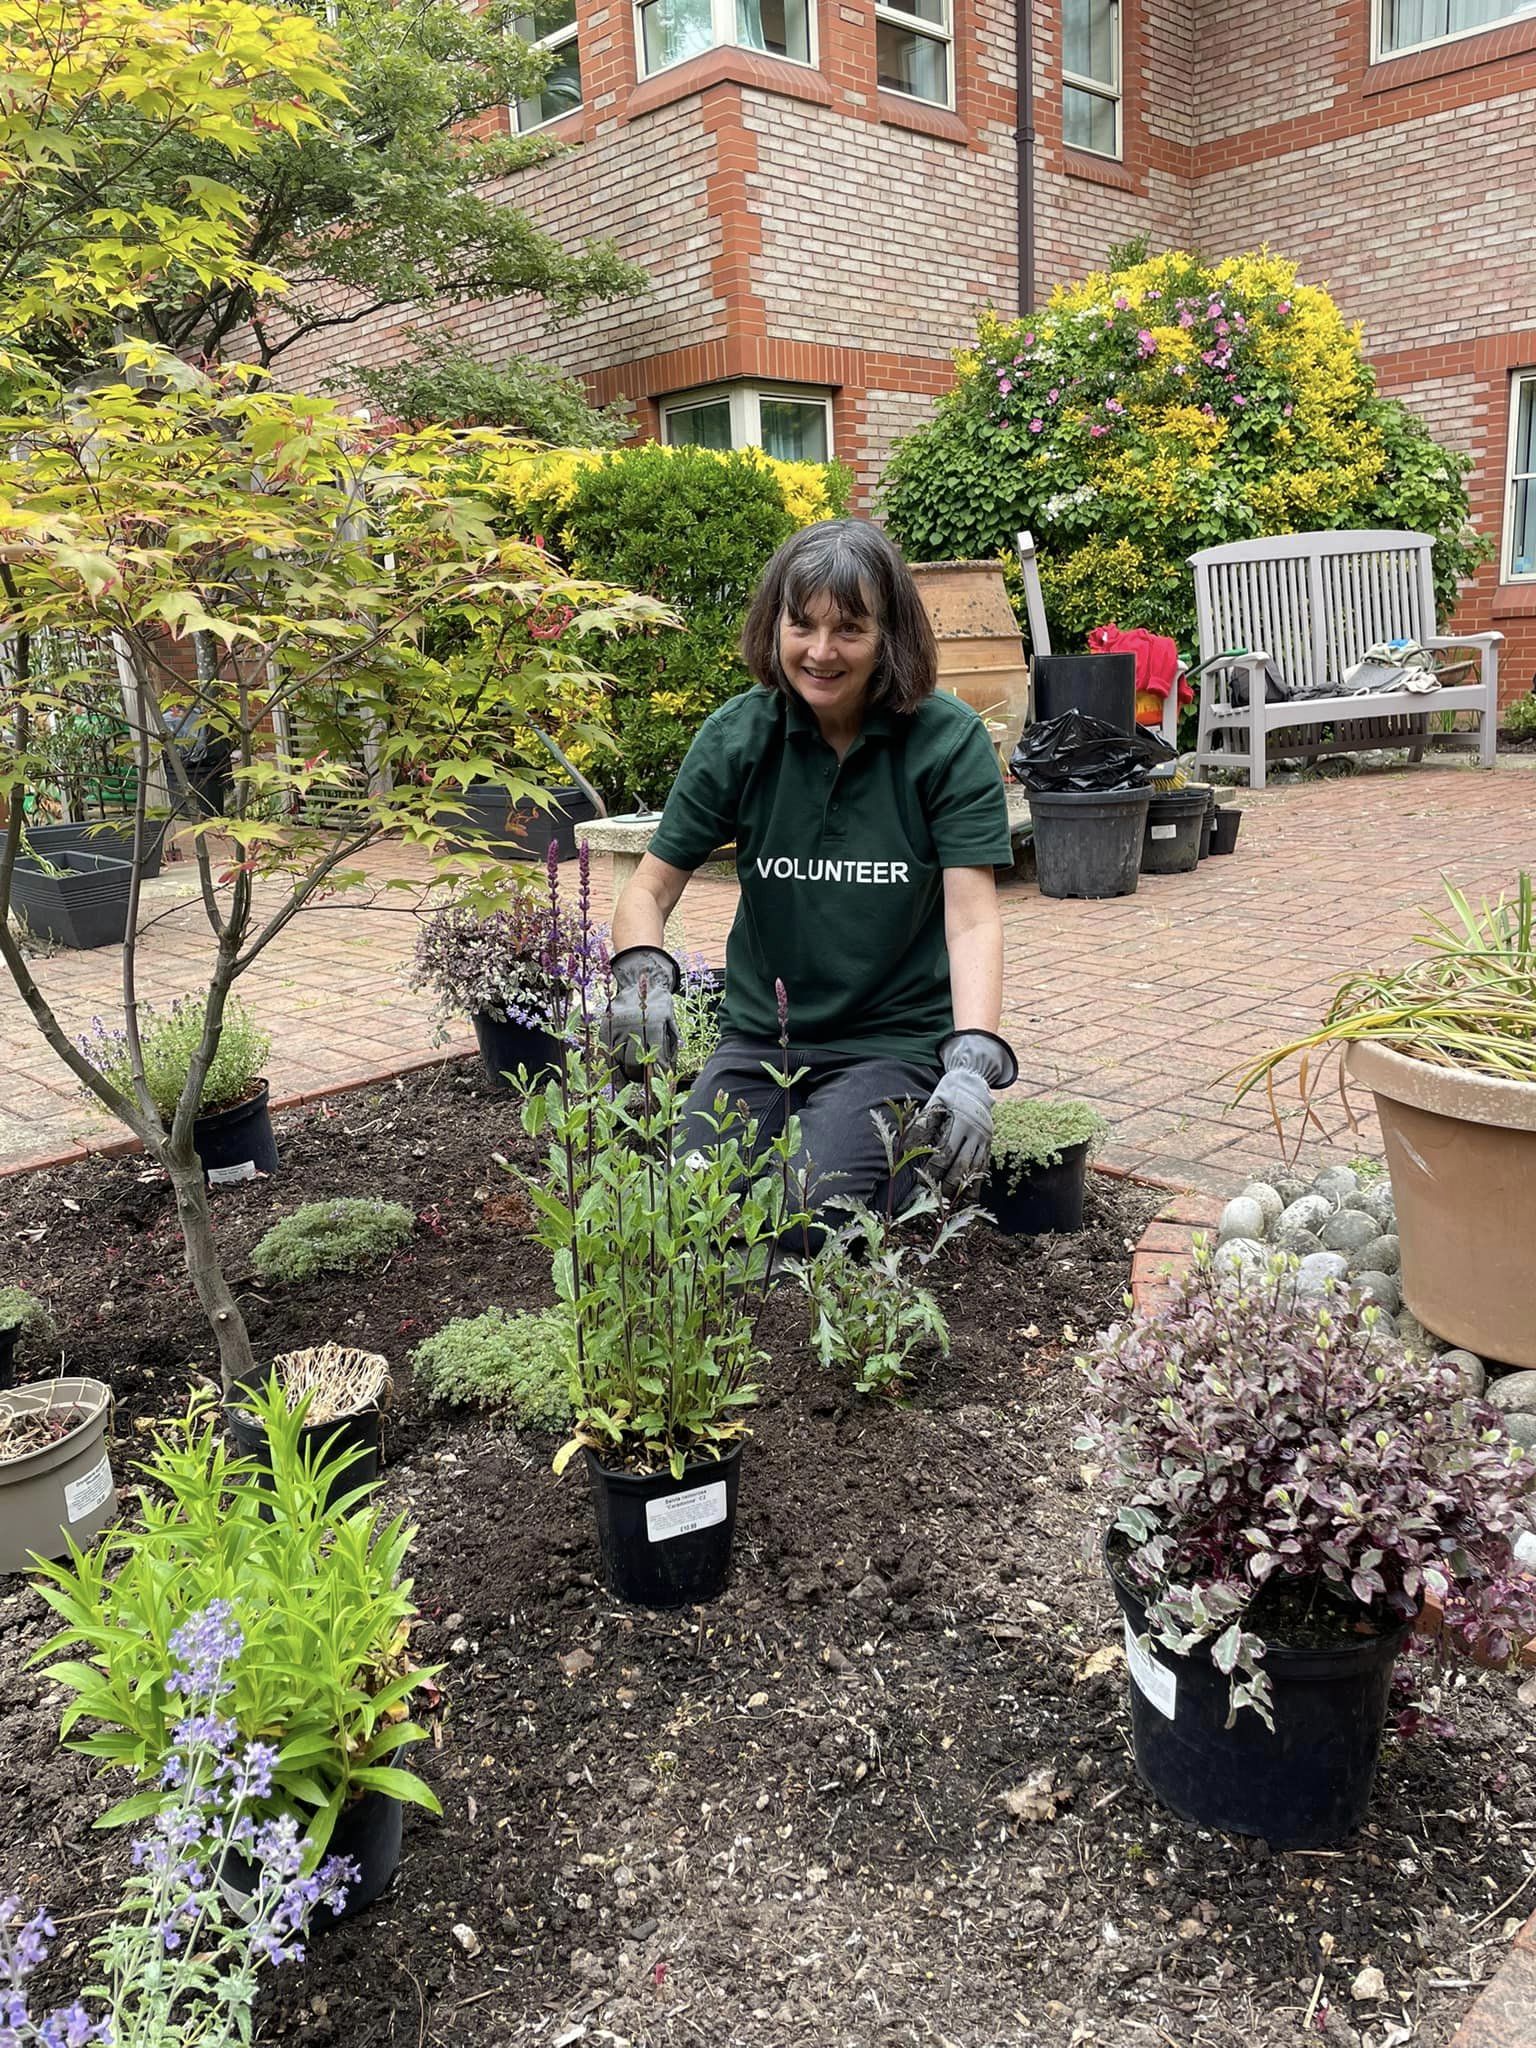 A female volunteer in a green tabard, kneeling next to a flower bed with pots of plants.